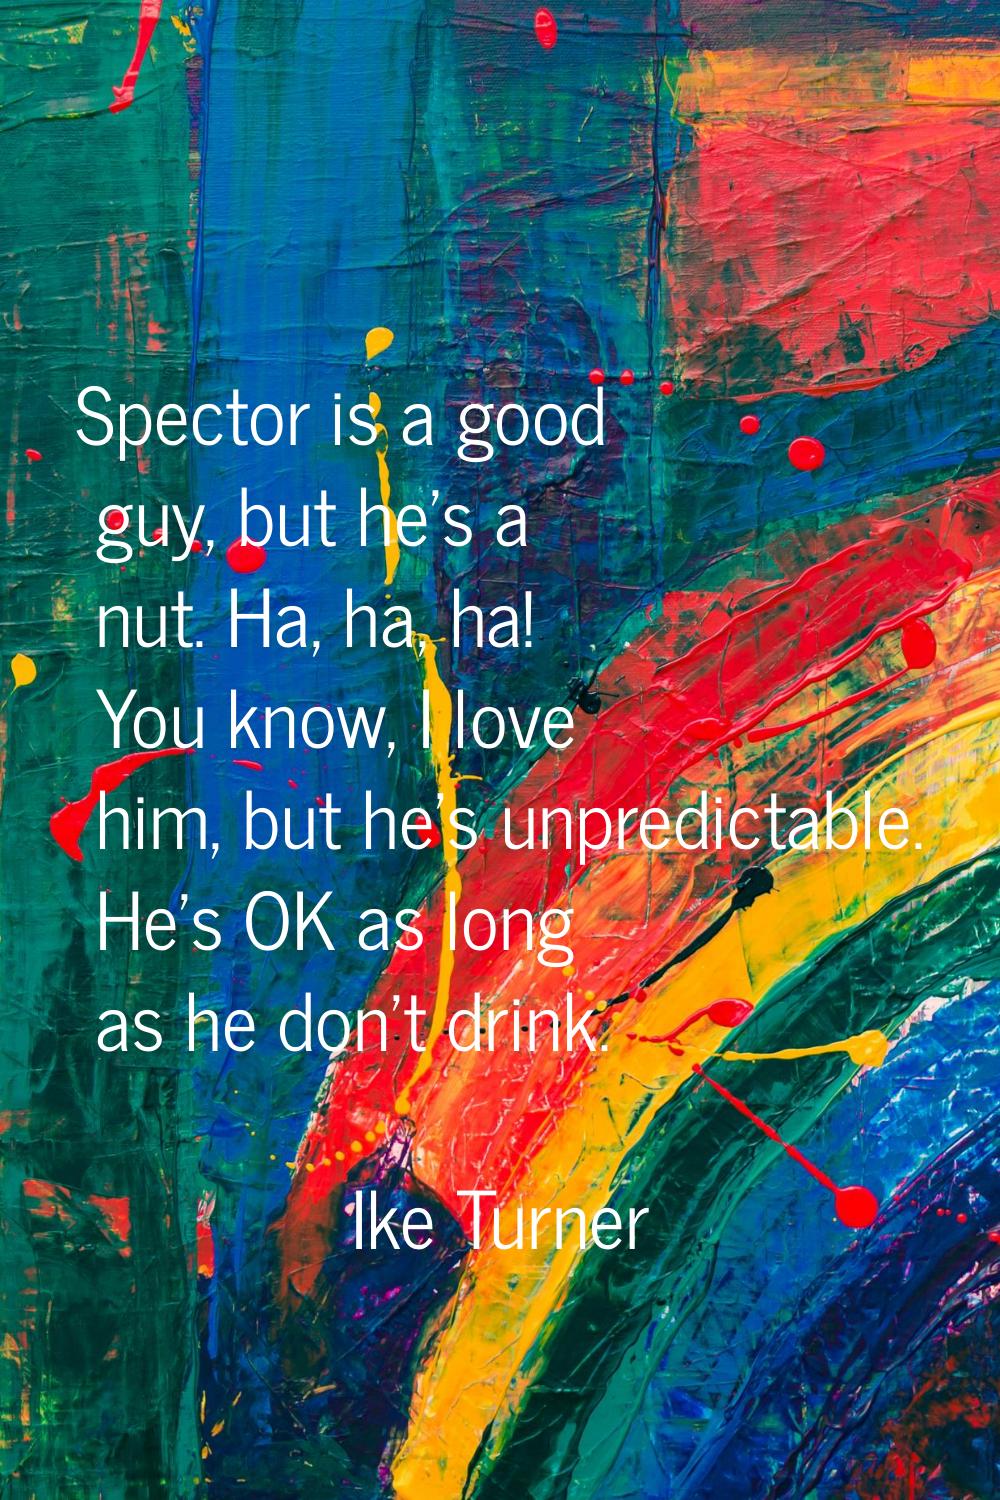 Spector is a good guy, but he's a nut. Ha, ha, ha! You know, I love him, but he's unpredictable. He